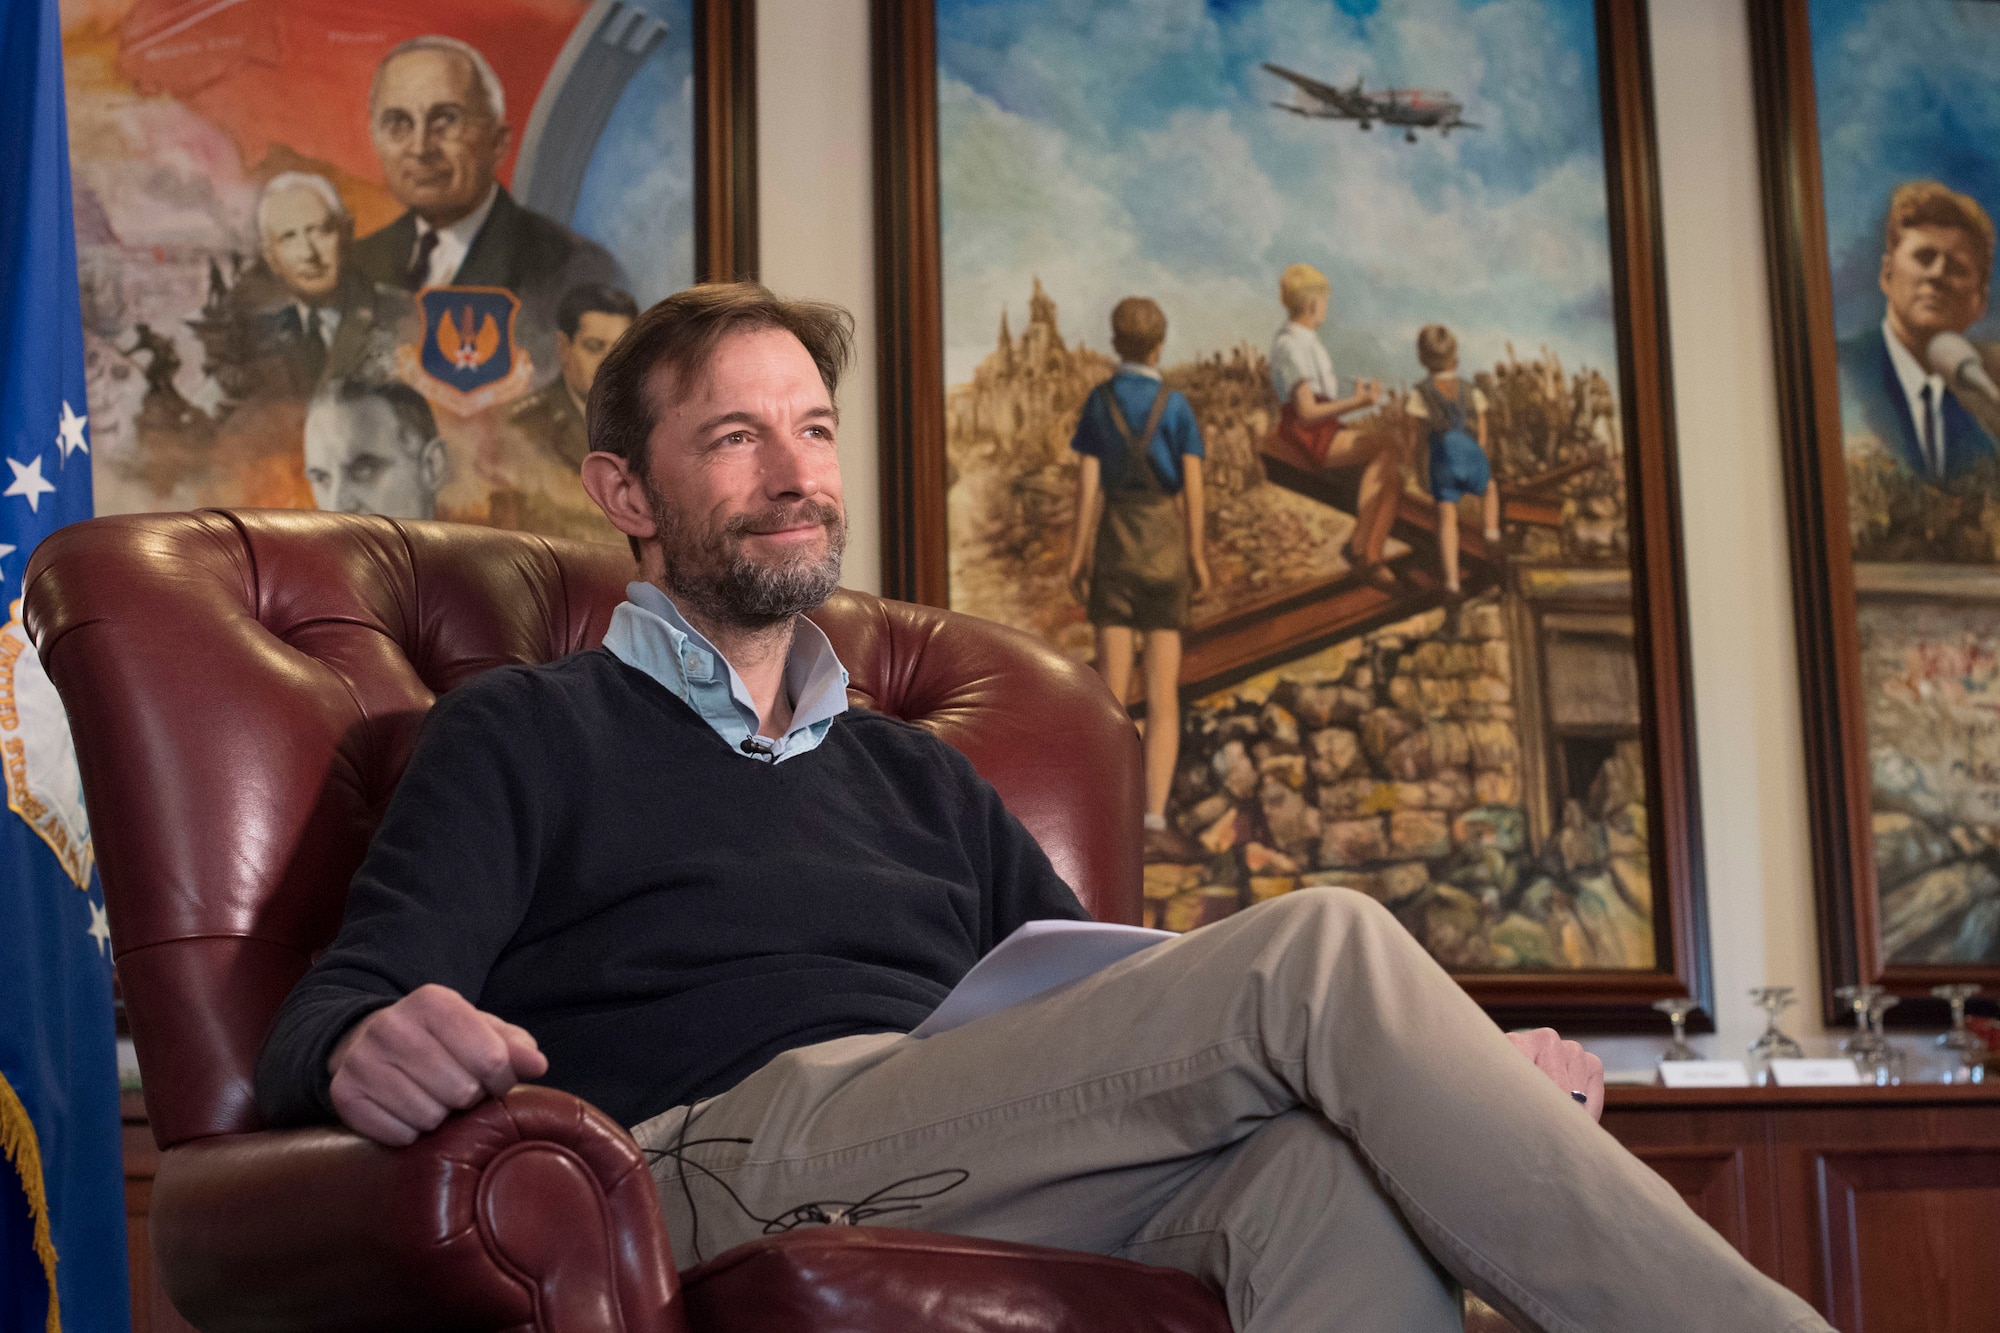 A man sits in a chair with historical paintings in the background.